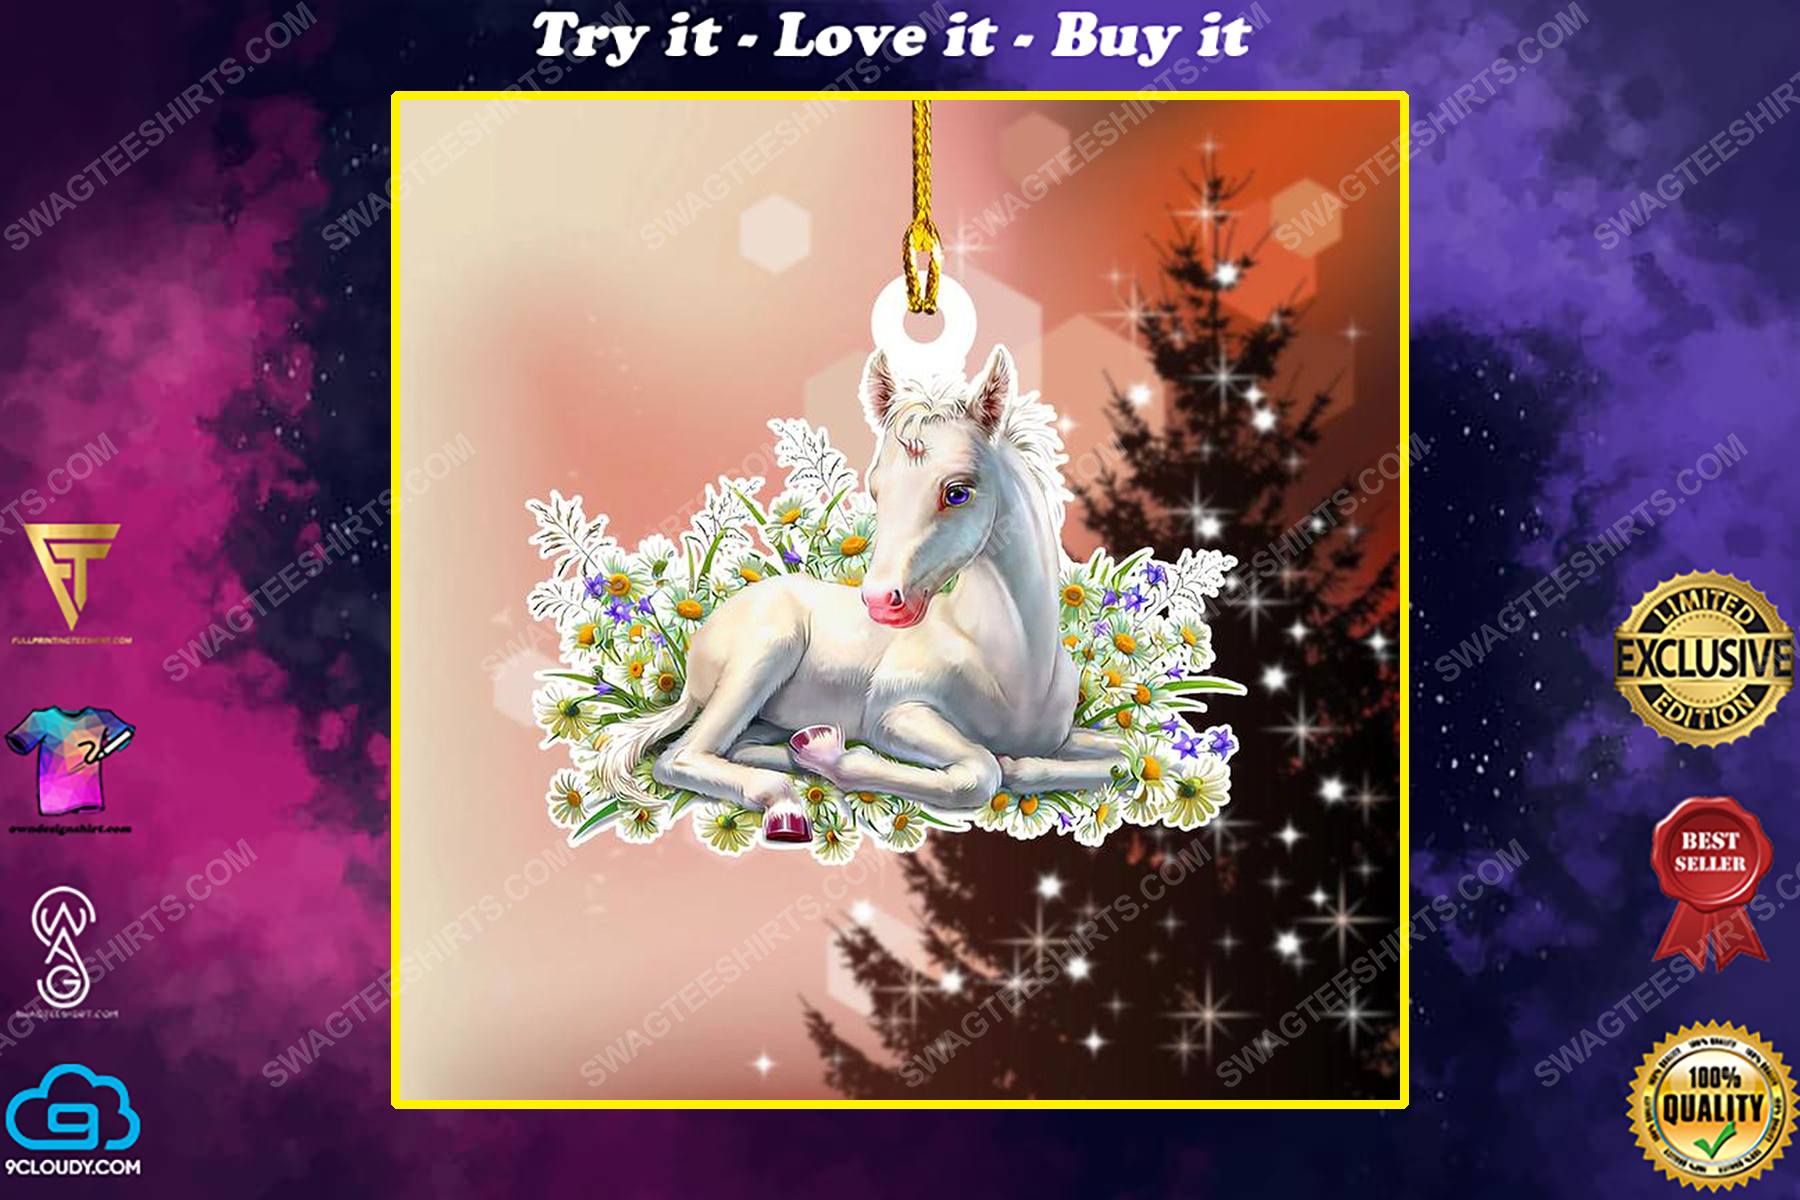 Unicorn and flower christmas gift ornament